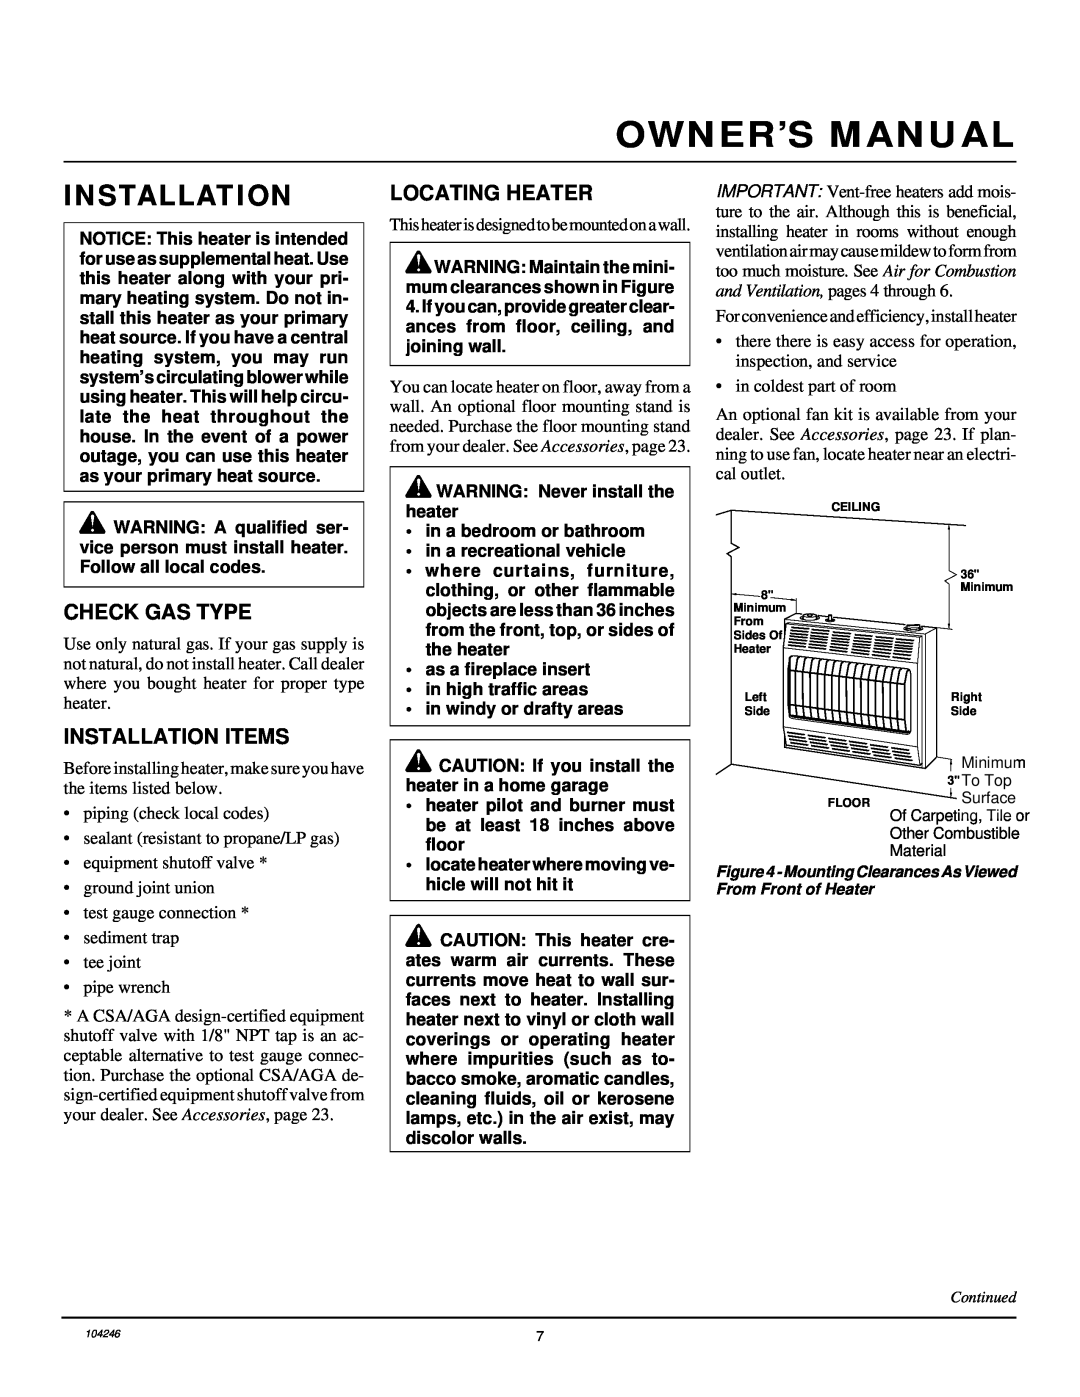 Vanguard Heating VN1800ITB, VN2550ITB installation manual Locating Heater, Check Gas Type, Installation Items 